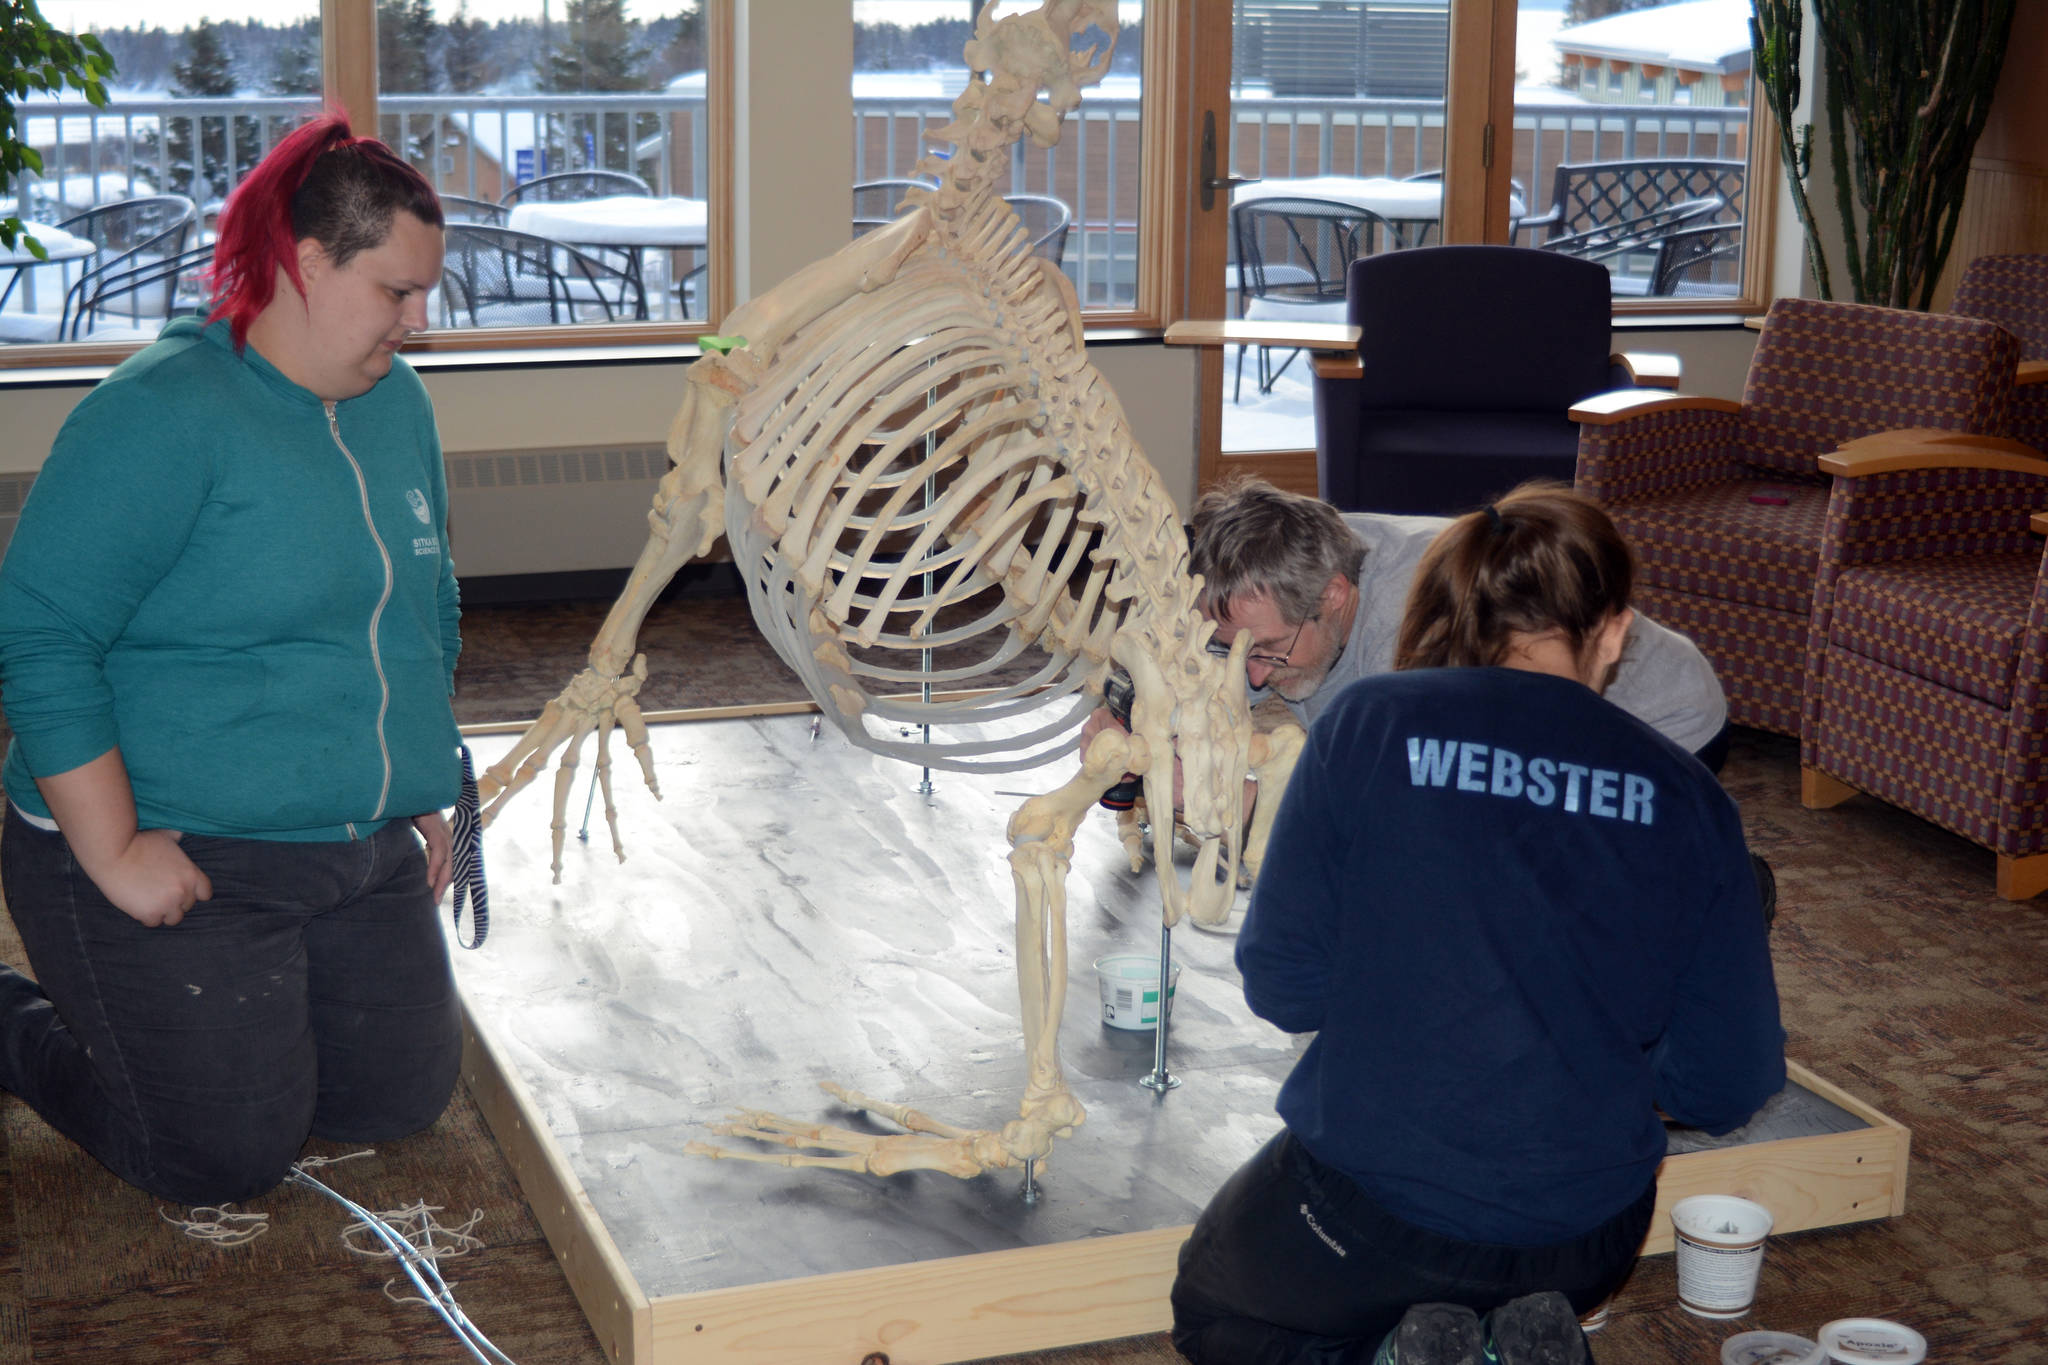 Zobeida Rutkin, left, helps Lee Post, center, and Nicole Webster, right assemble a skeleton Woody, a sea lion that lived at the Alaska SeaLife Center, Wednesday, Nov. 22, 2017 in Pioneer Hall of Kachemak Bay Campus in Homer, Alaska. The students helped articulate Woody’s skeleton in Post’s Marine Skeleton Articulation class. (Photo by Michael Armstrong, Homer News)